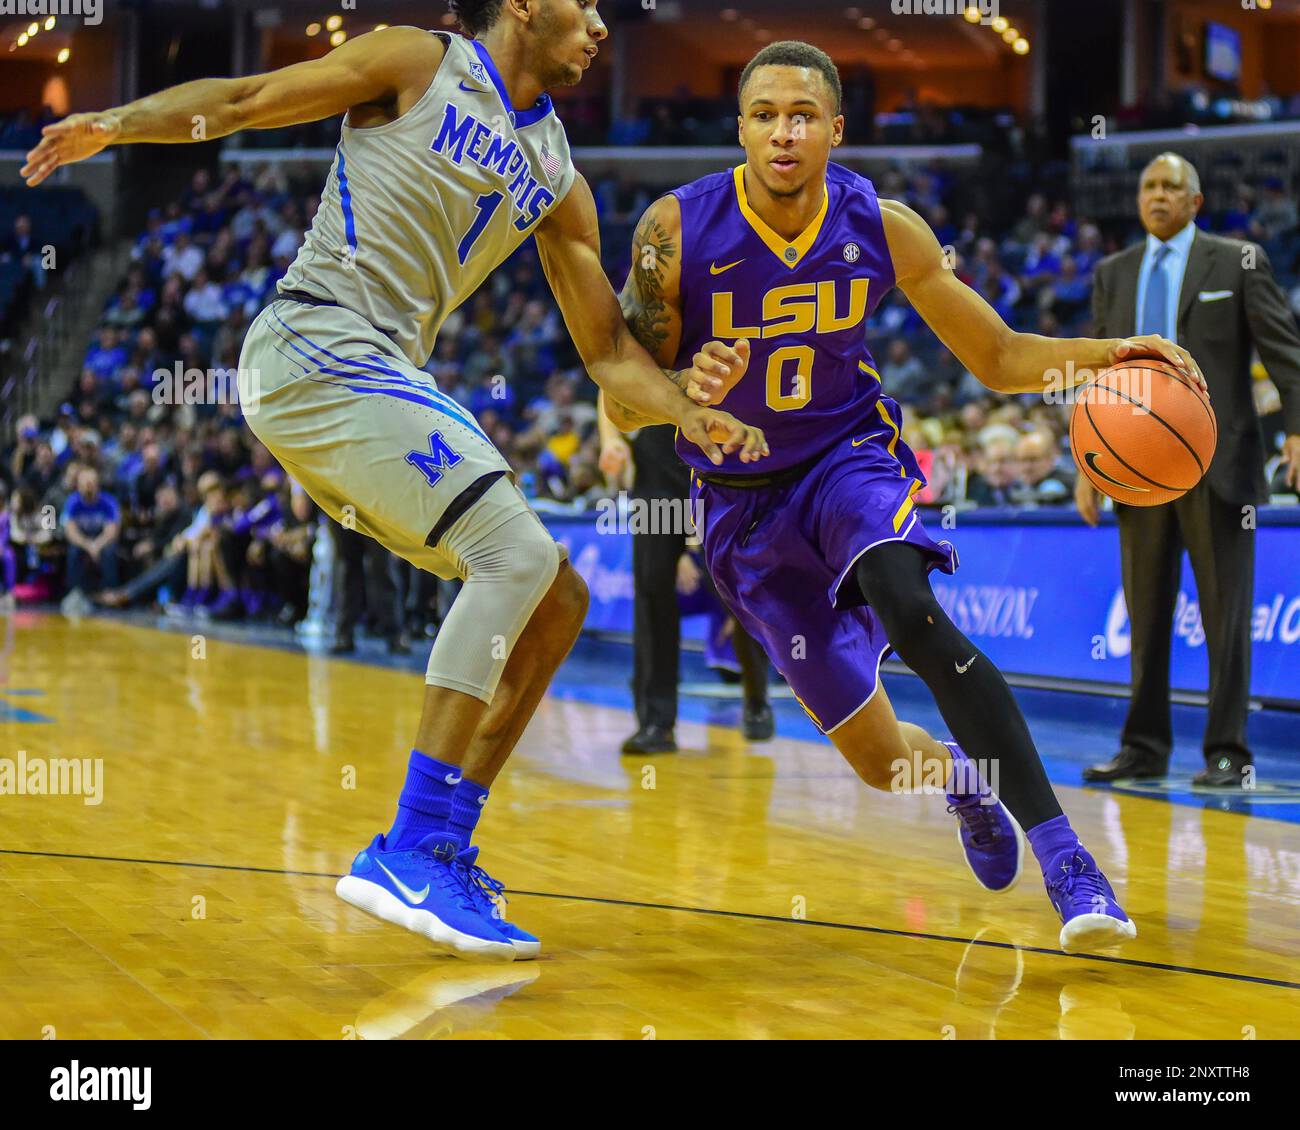 December 28, 2017; Memphis, TN, USA; LSU guard, BRANDON SAMPSON (0),  attempts to drive to the hoop, as Memphis, JAMAL JOHNSON (1), stands in the  way, during NCAA D1 basketball action at